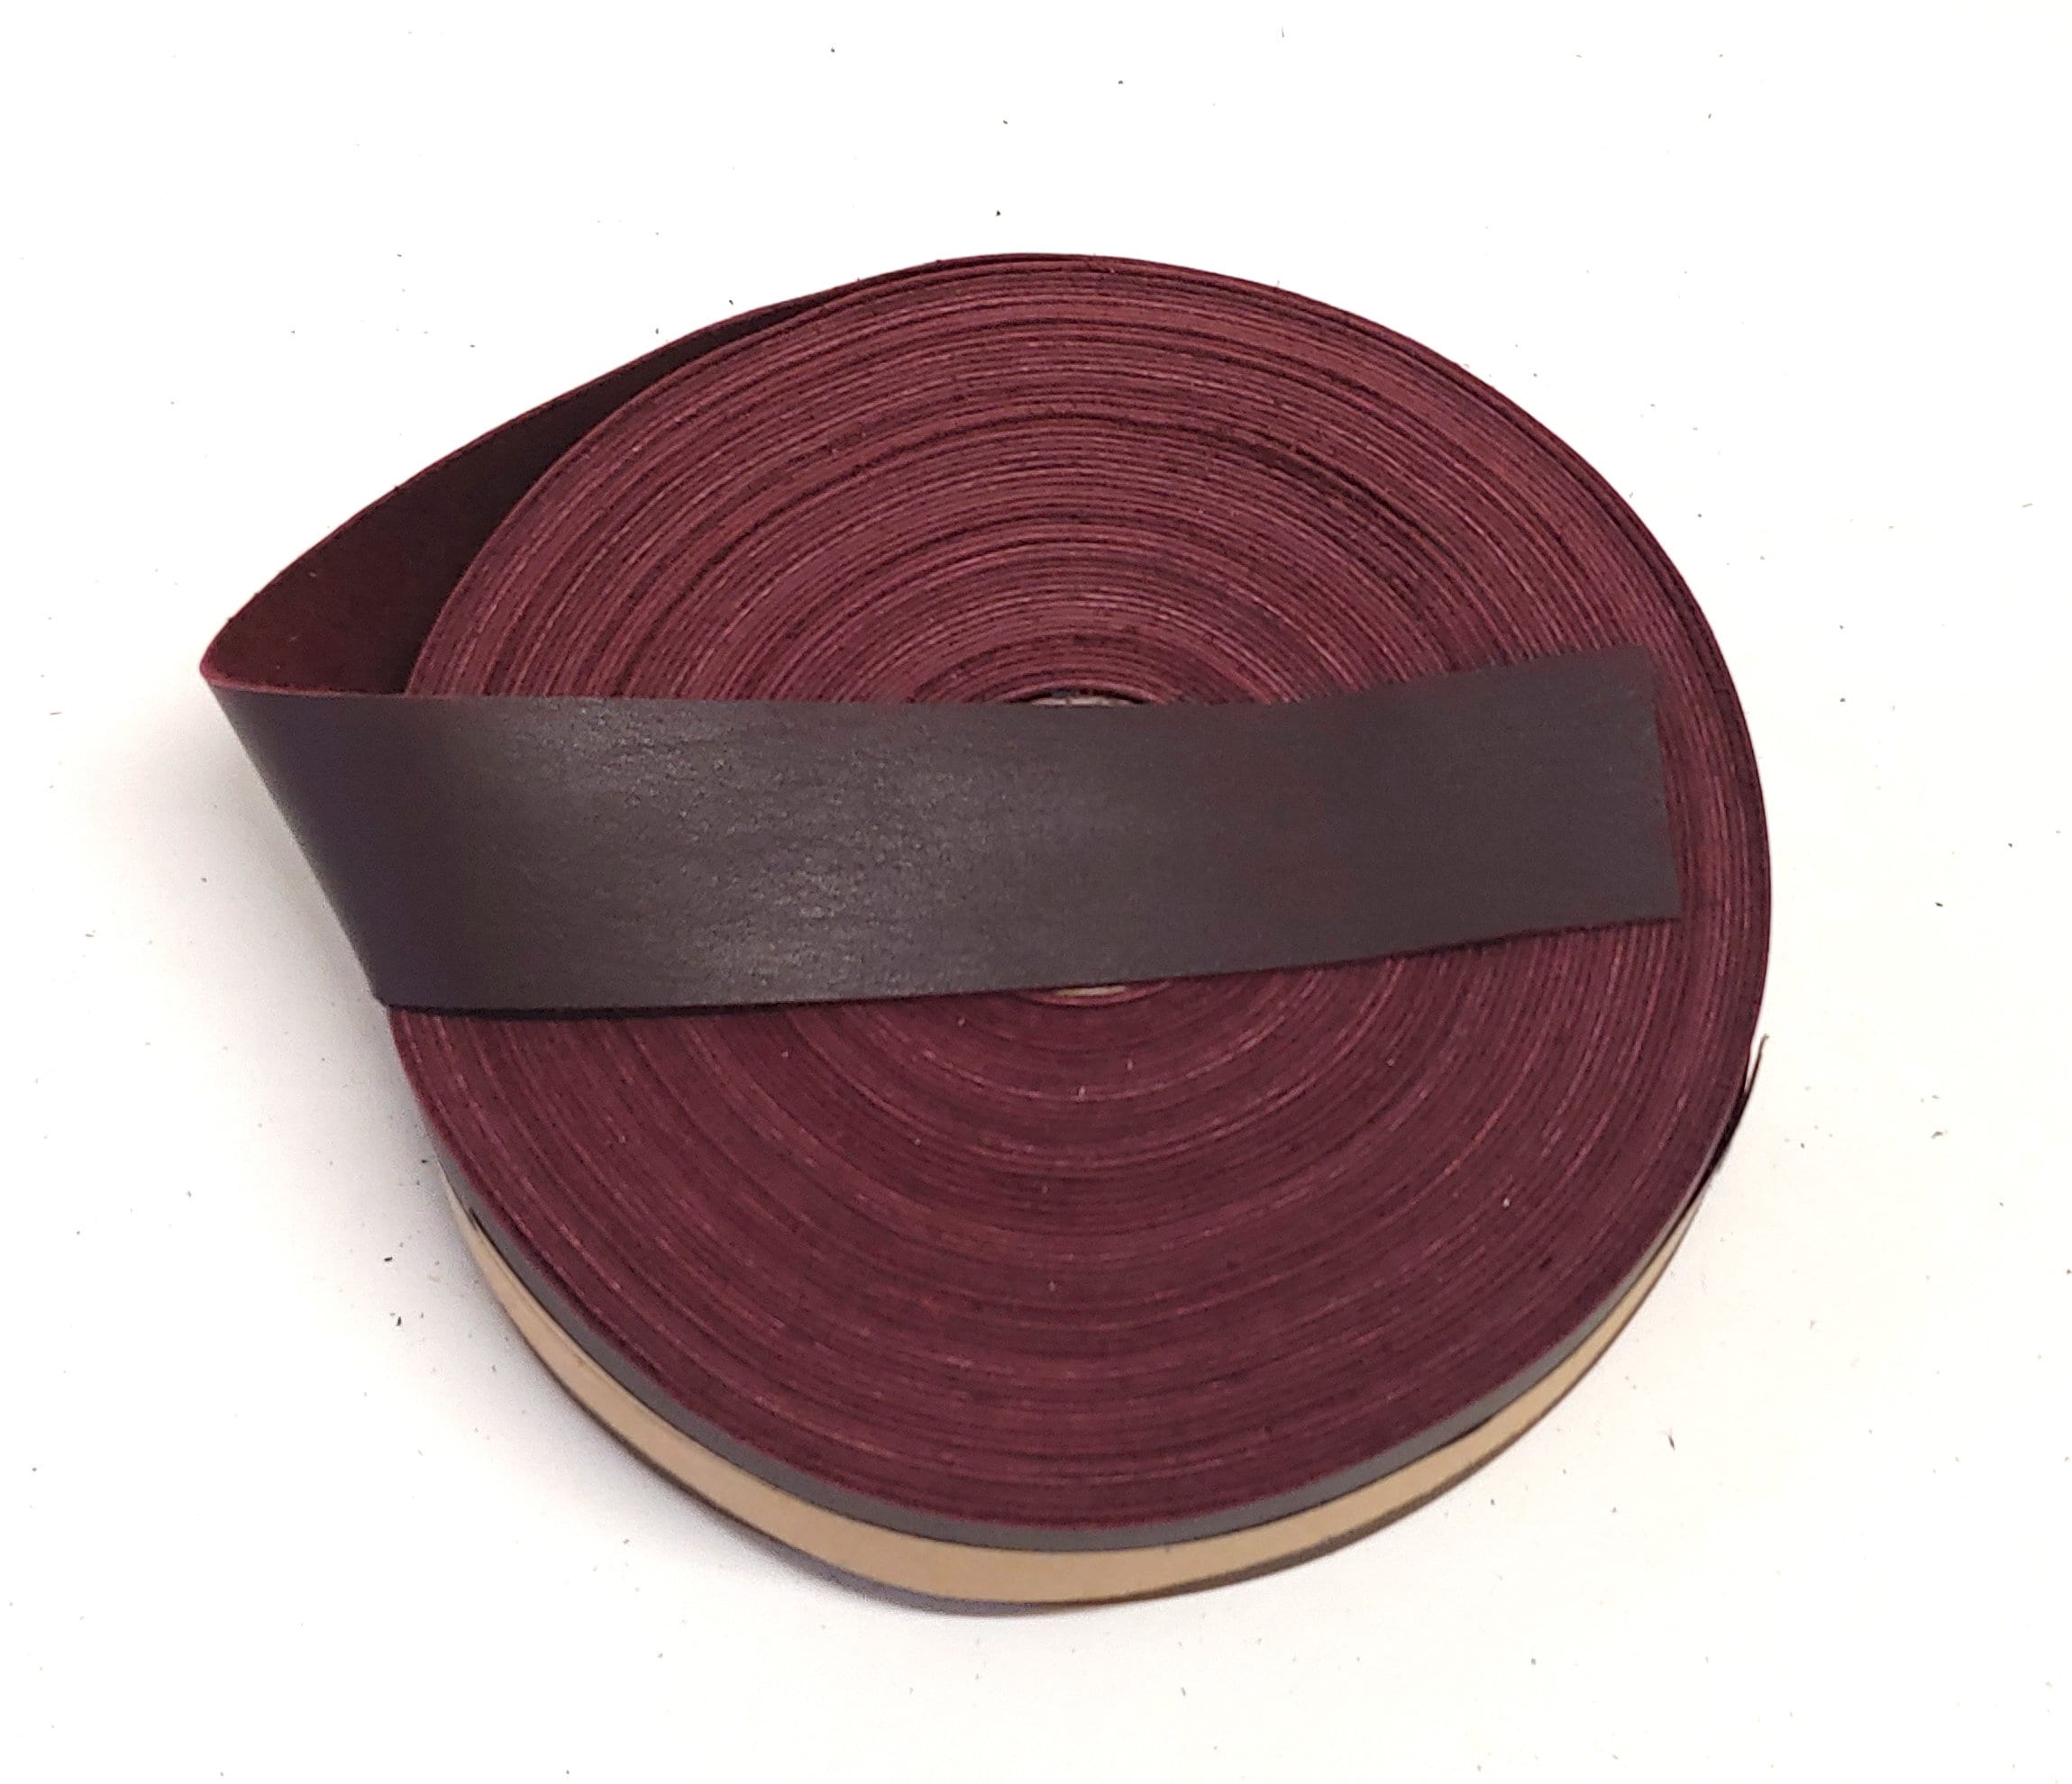 LEATHER HIDE TAPE 1 Trim/decorative Leather Tape/soft Leather  Strip/thickness 0.6mm/size Sm 8, Md 12, Lg 18, X-large 25 